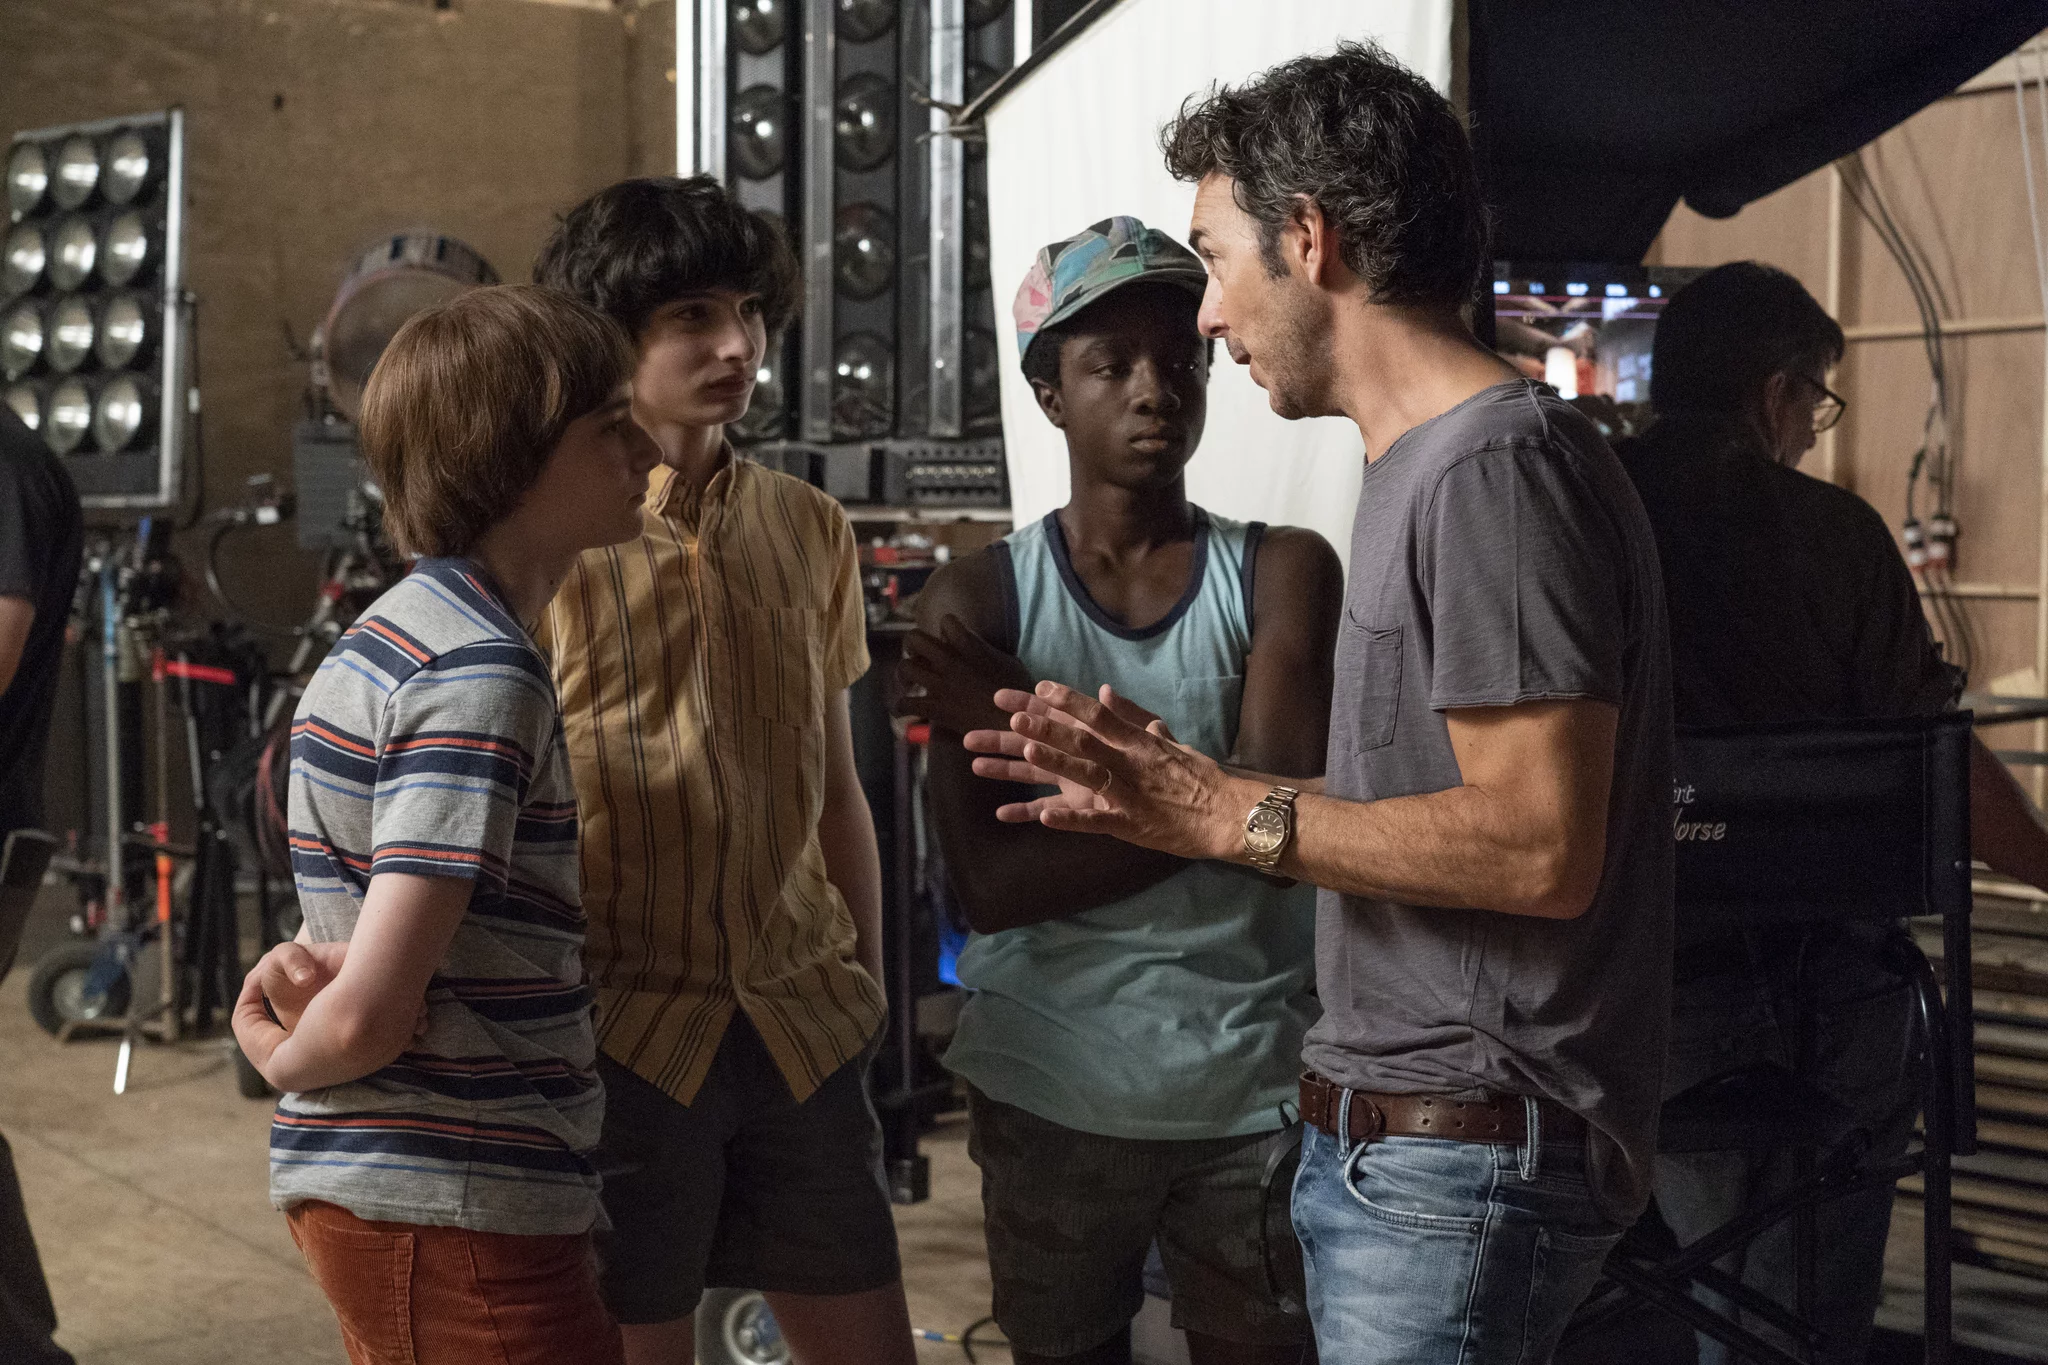 Shawn Levy on the set of Stranger Things